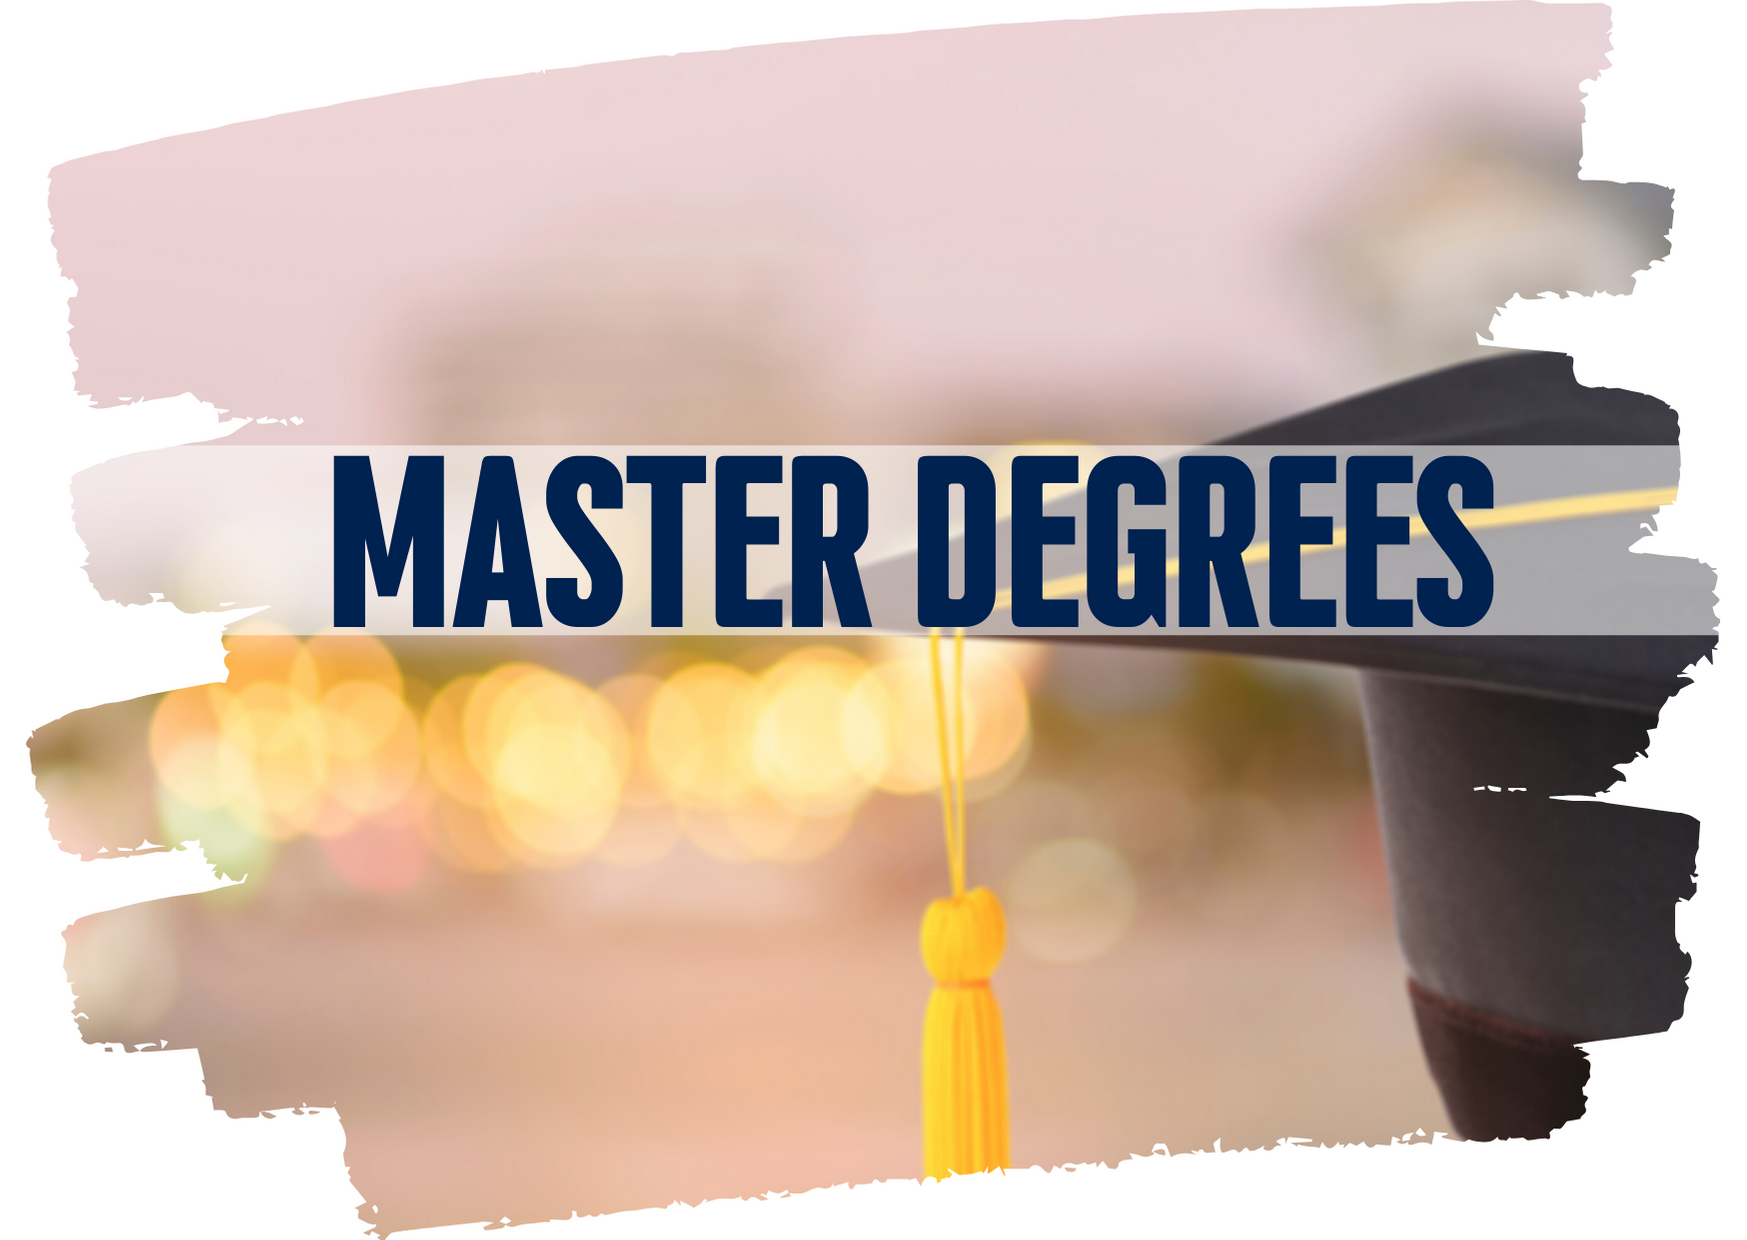 masters degree research administration